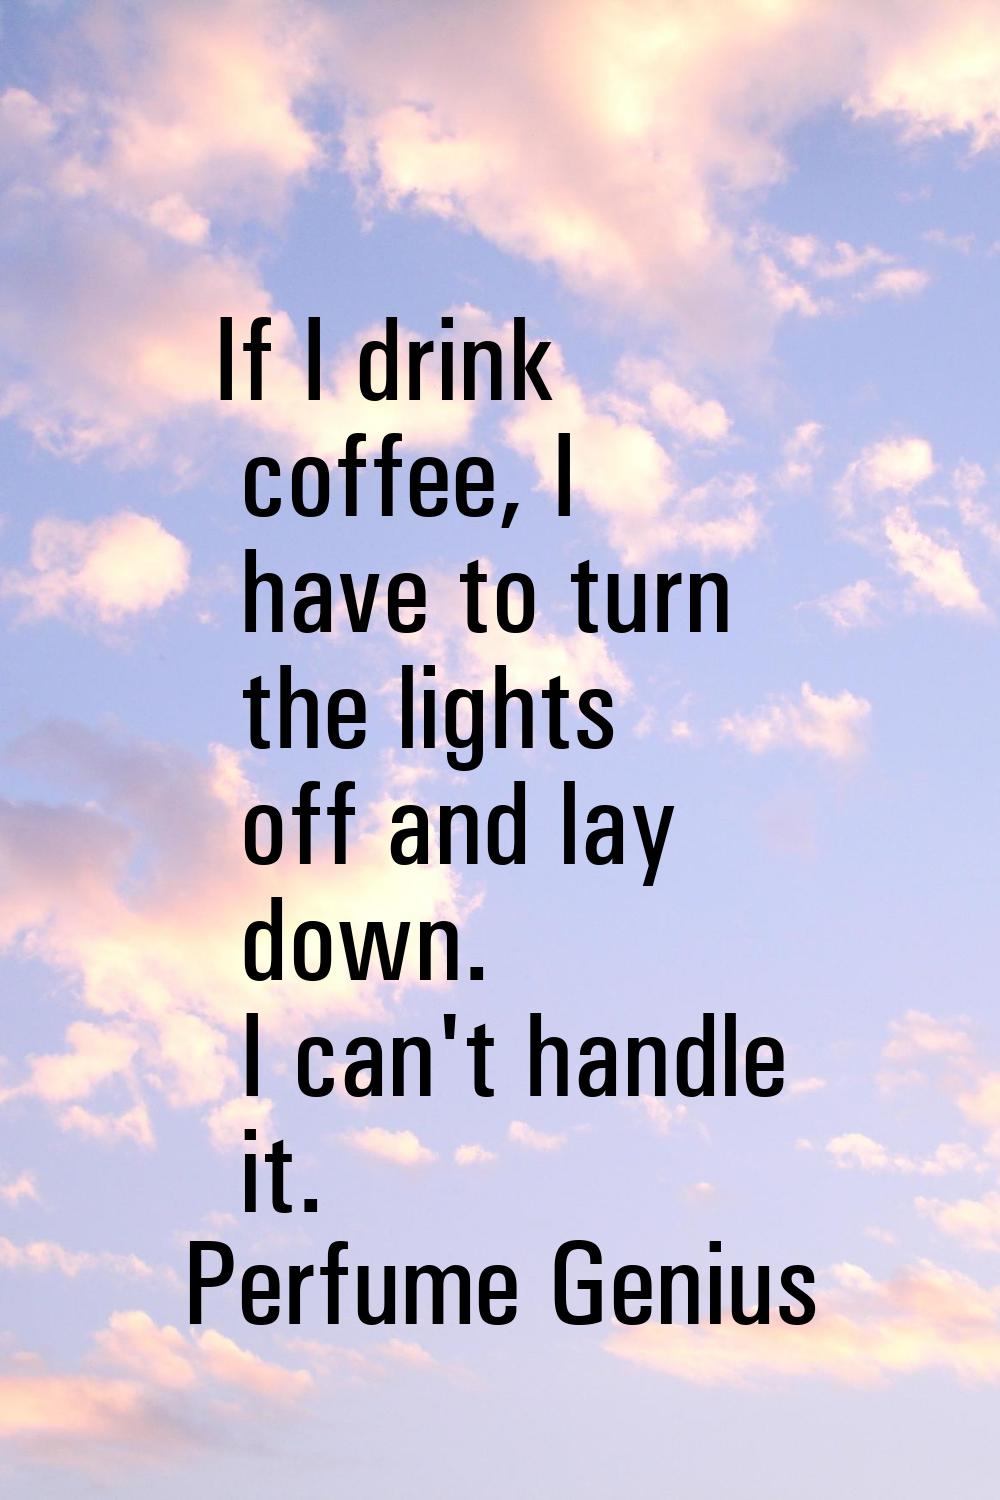 If I drink coffee, I have to turn the lights off and lay down. I can't handle it.